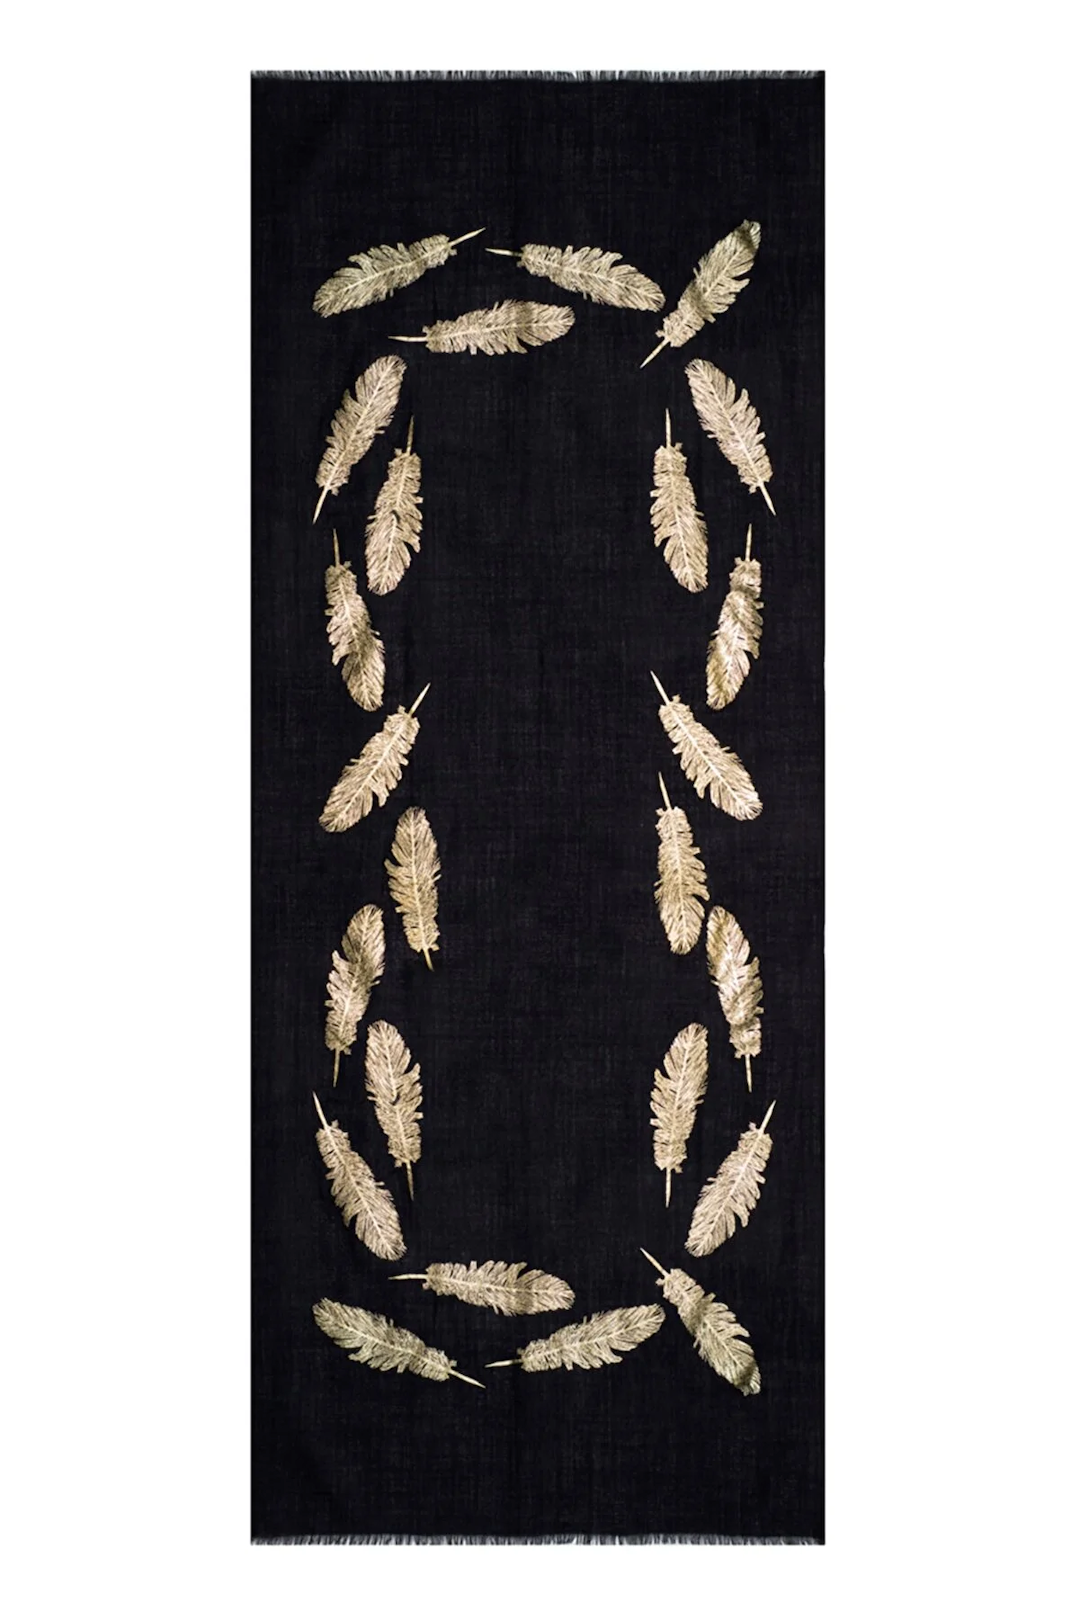 Angel Feathers Crystal Feathers Shawl Stole - Black Gold